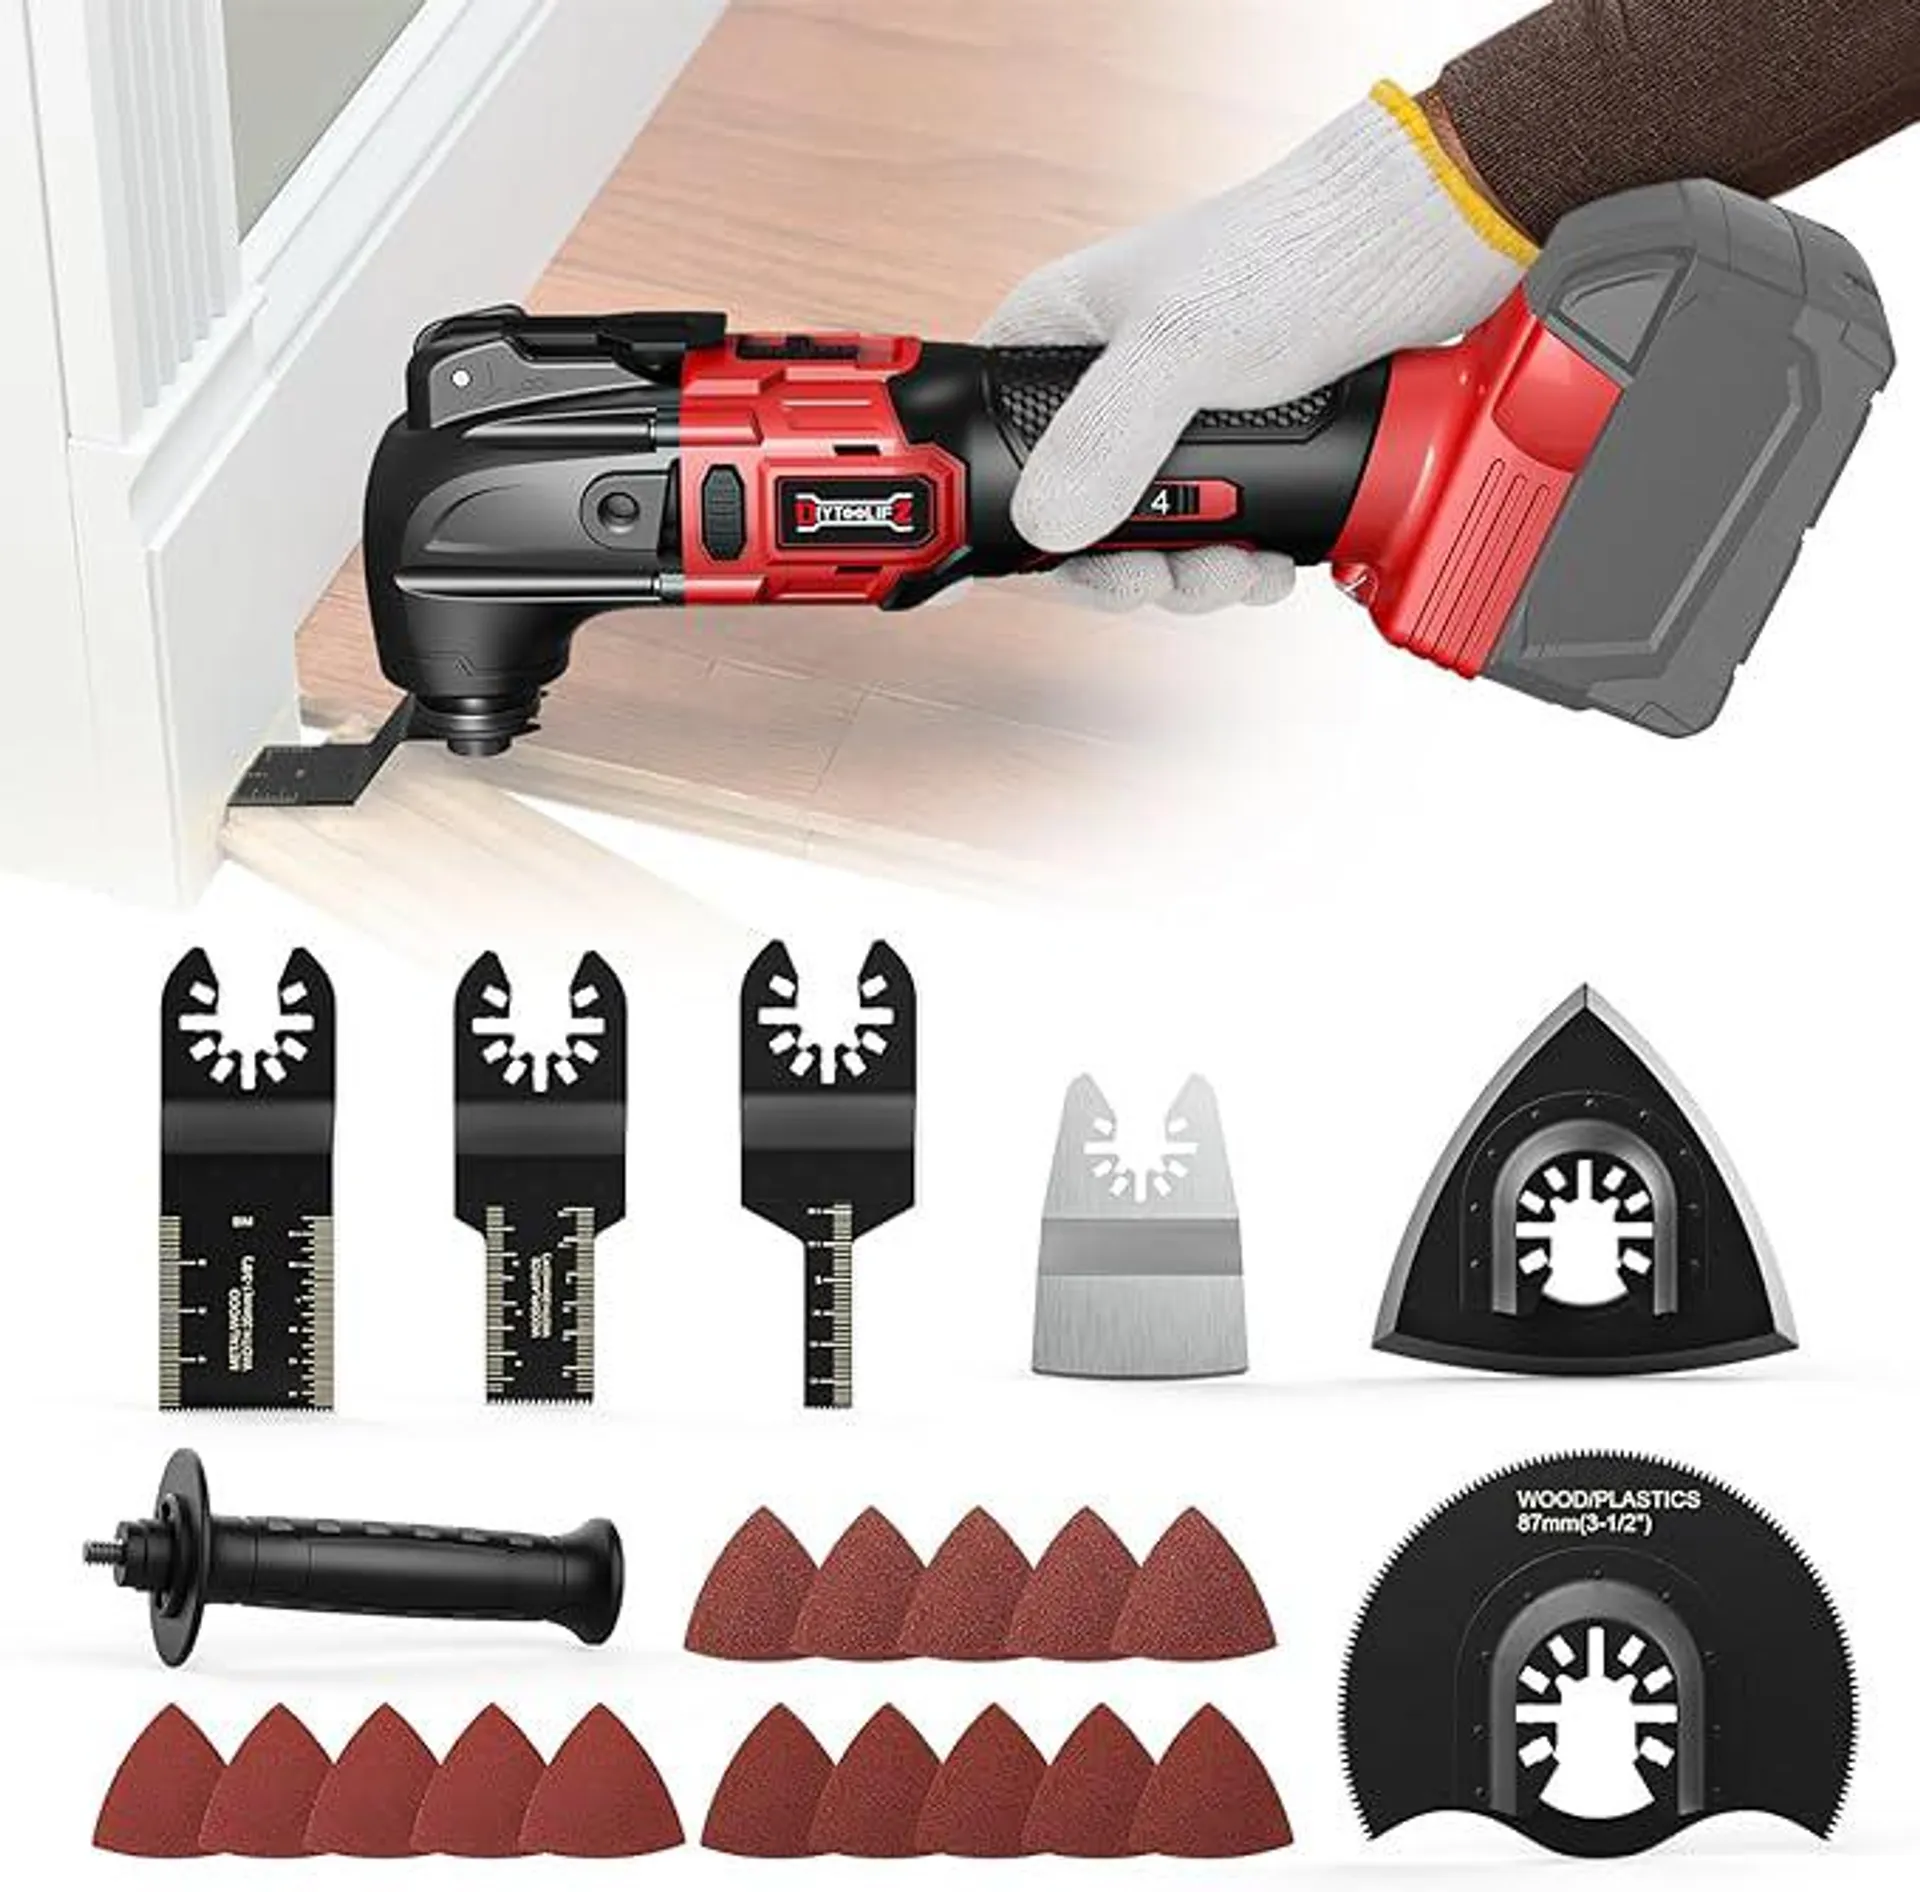 Cordless Oscillating Tool for Milwaukee 18V Battery, 6 Variable Speed Brushless-Motor Tool, Oscillating multi tool kit for Cutting Wood Drywall Nails Remove Grout & Sanding(Battery Not Included)